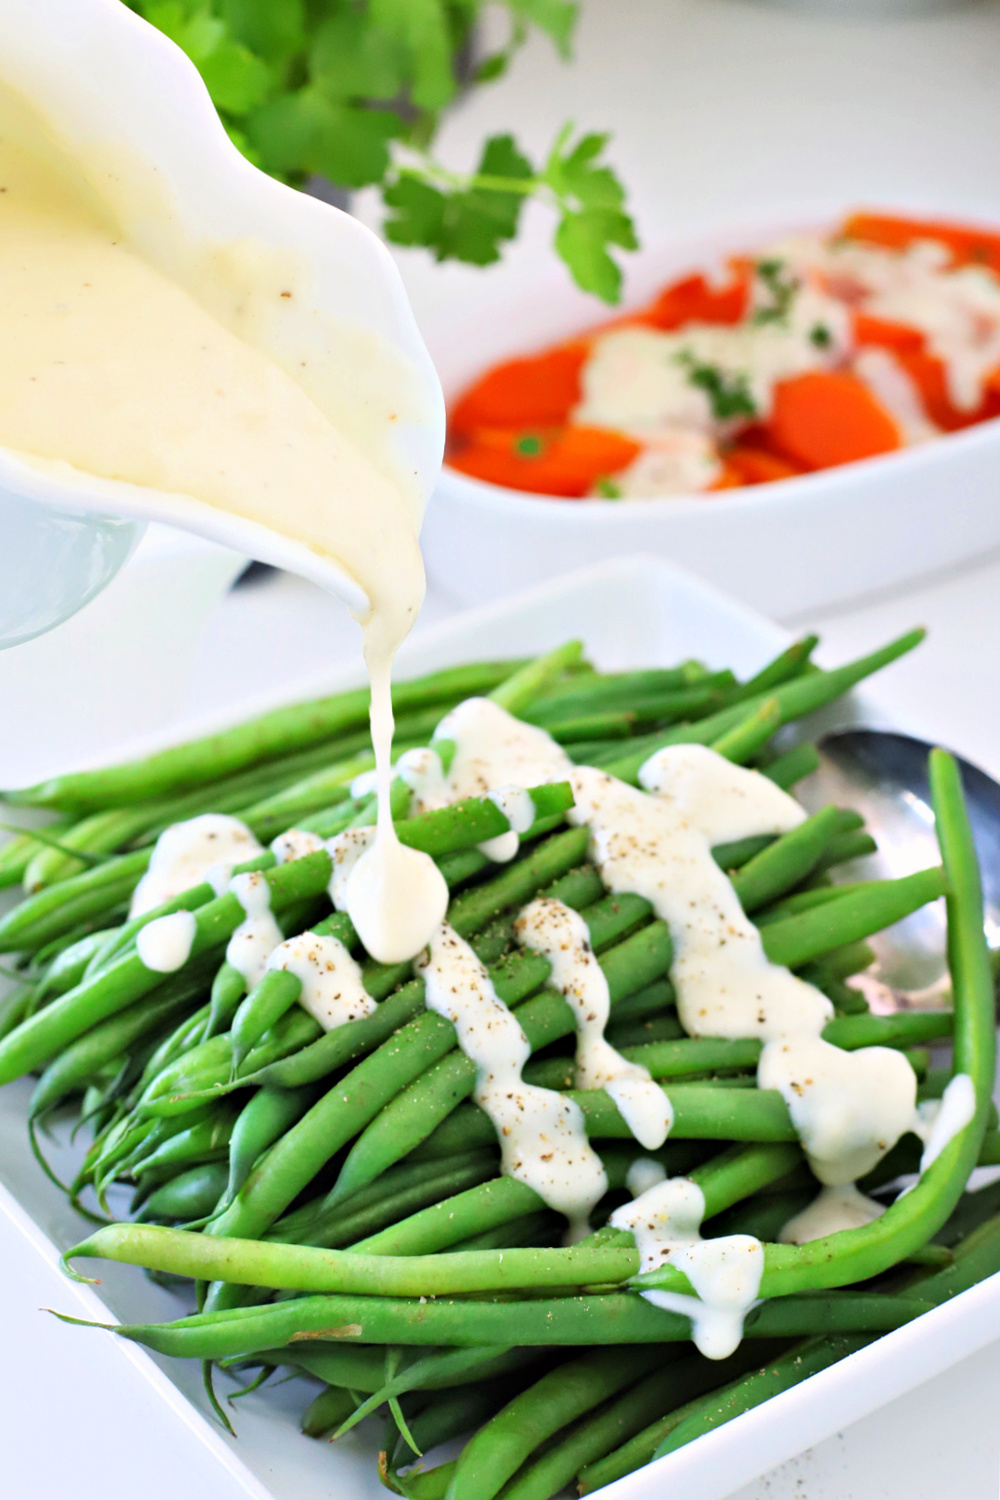 No more boring veggies! Kick up the flavor of your carrots, green beans and broccoli with a quick and easy recipe for creamy cheese sauce. Add to your weeknight or holiday meals like Easter, Thanksgiving and Christmas dinner.